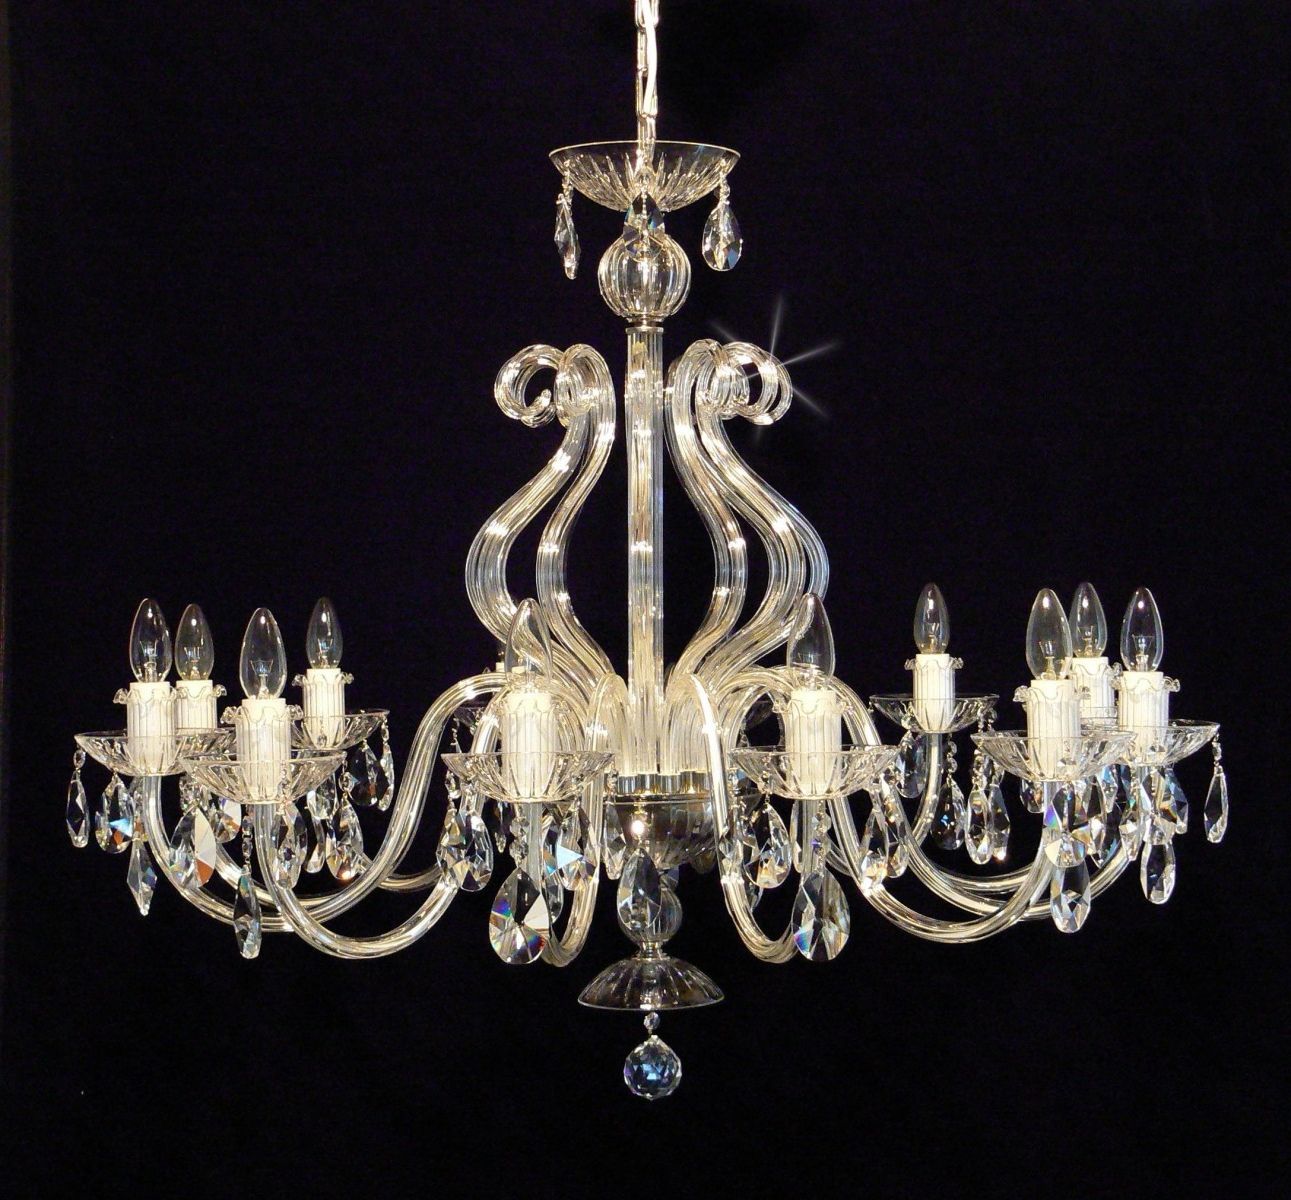 Current Soft Silver Crystal Chandeliers Regarding 12 Arms Silver Crystal Chandelier With Glass Horns & Cut (View 7 of 15)